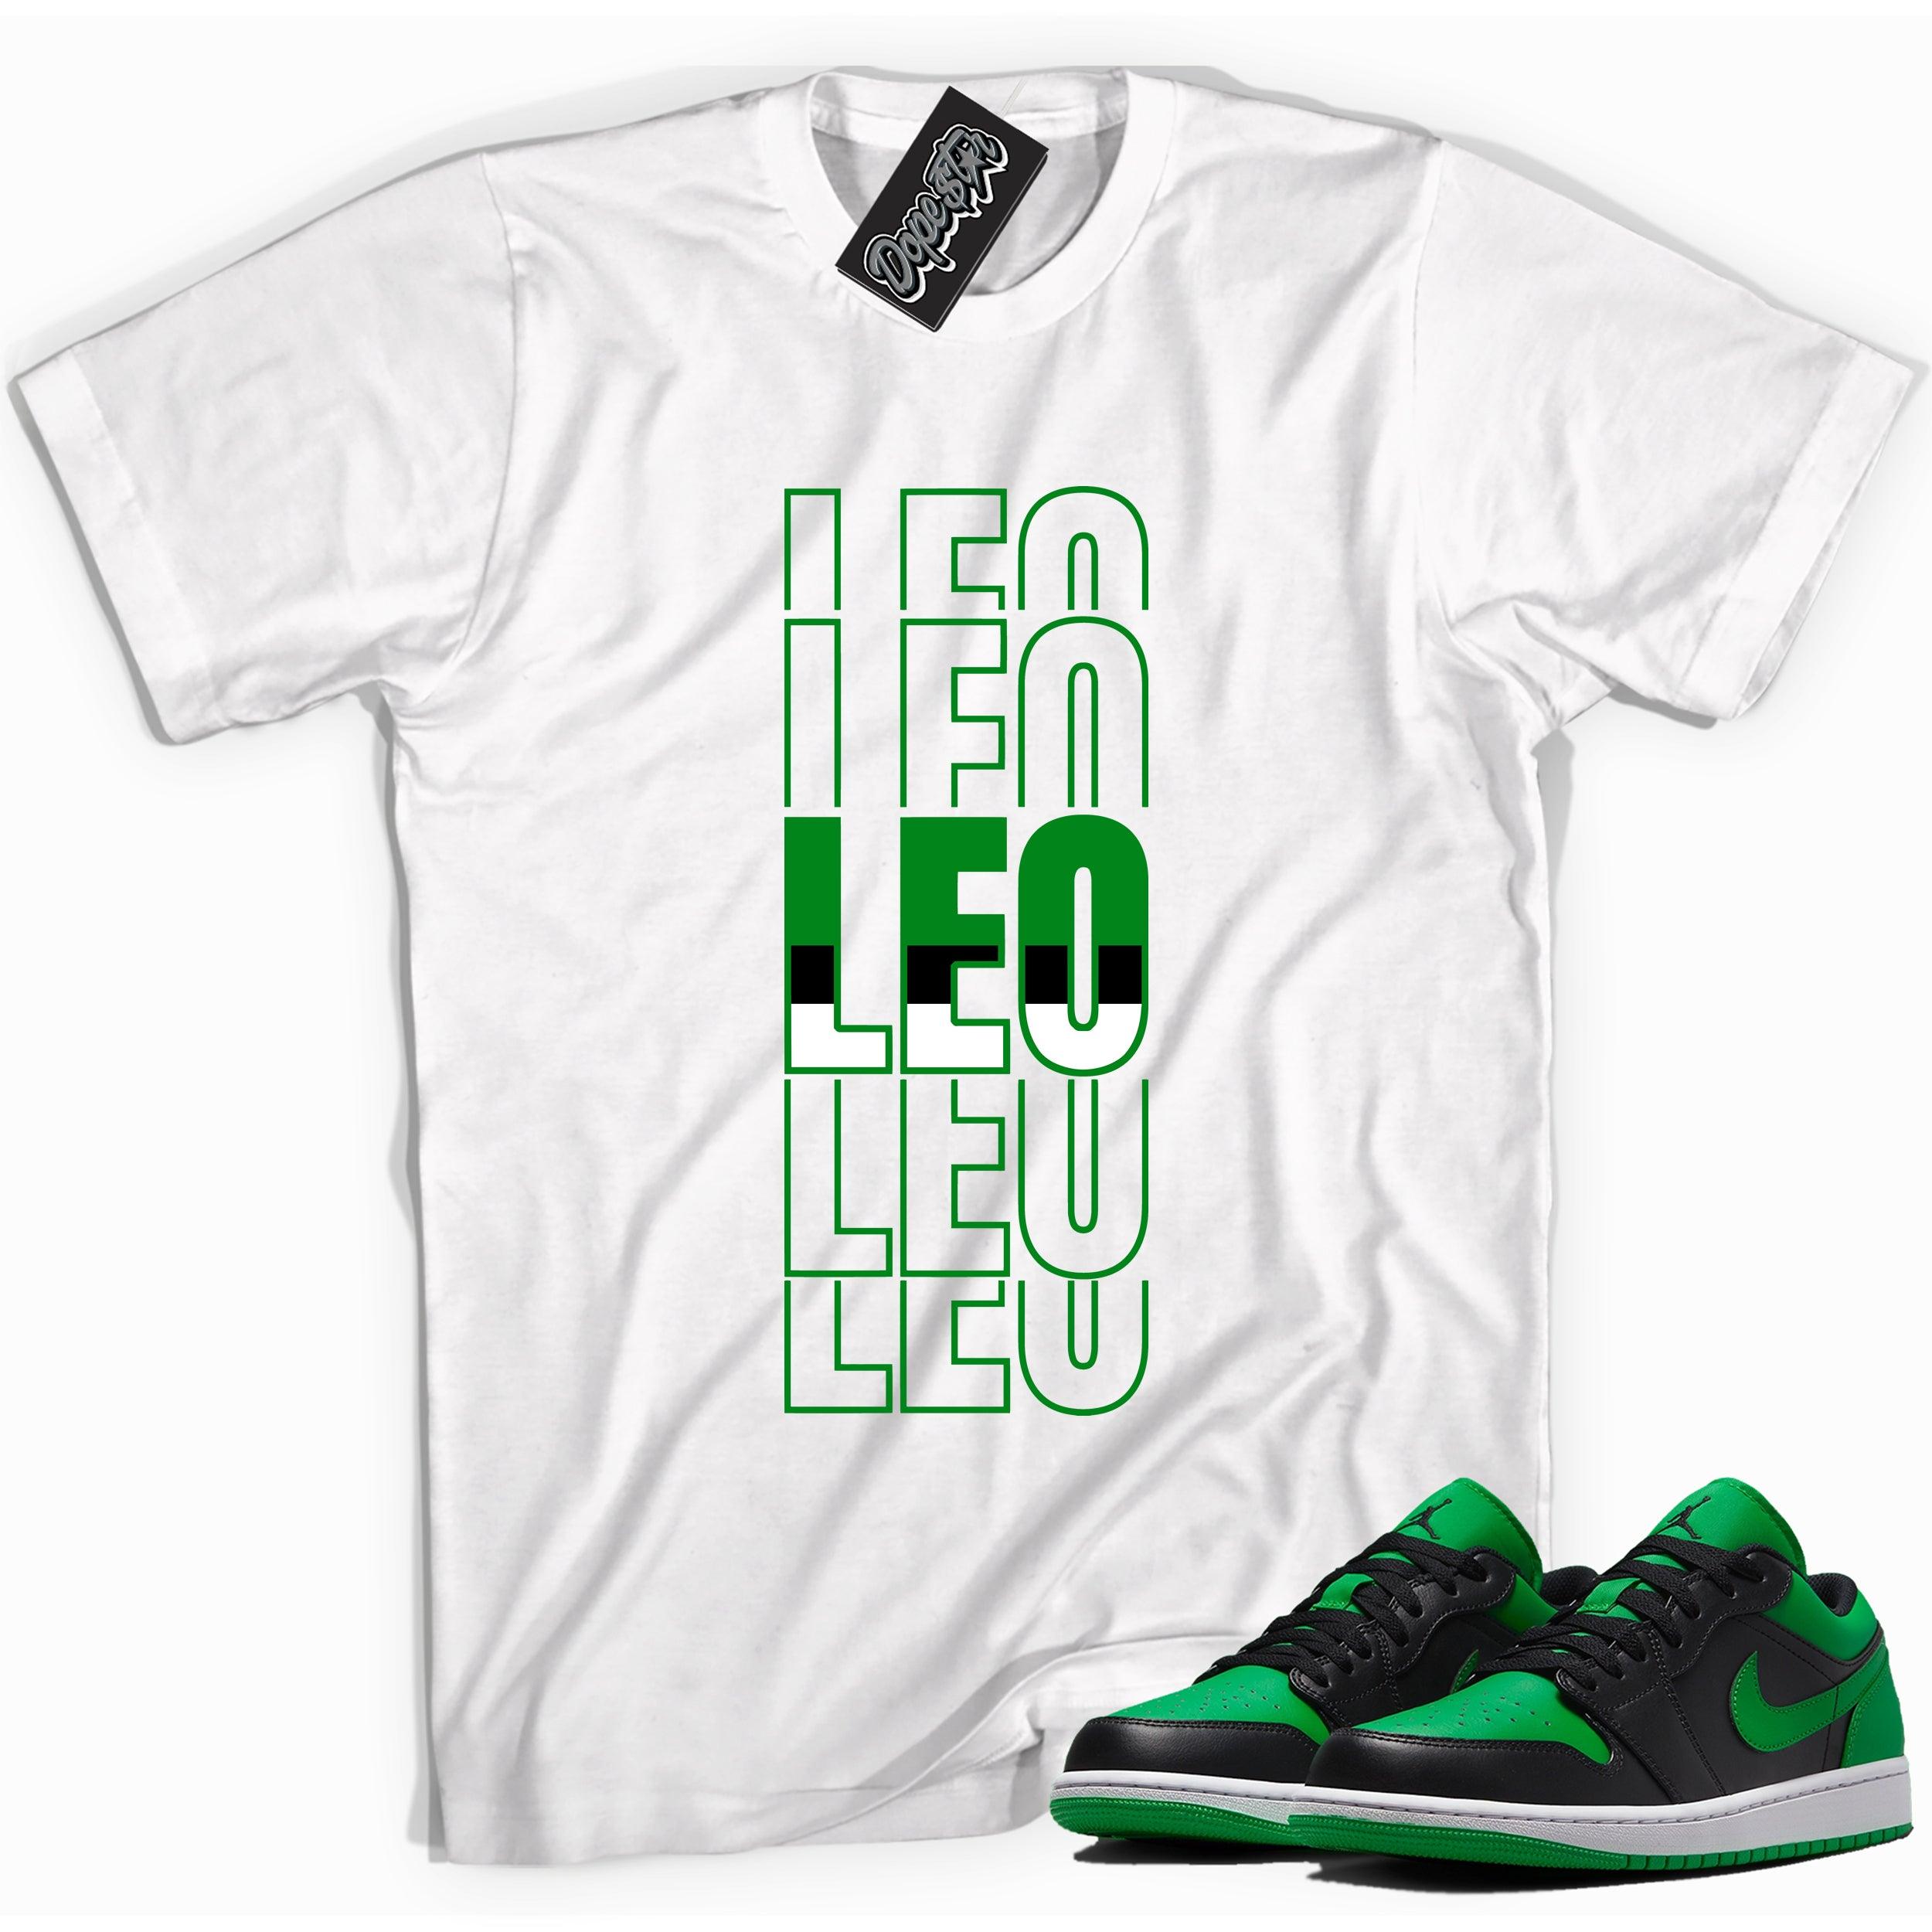 Cool white graphic tee with 'Leo' print, that perfectly matches Air Jordan 1 Low Lucky Green sneakers